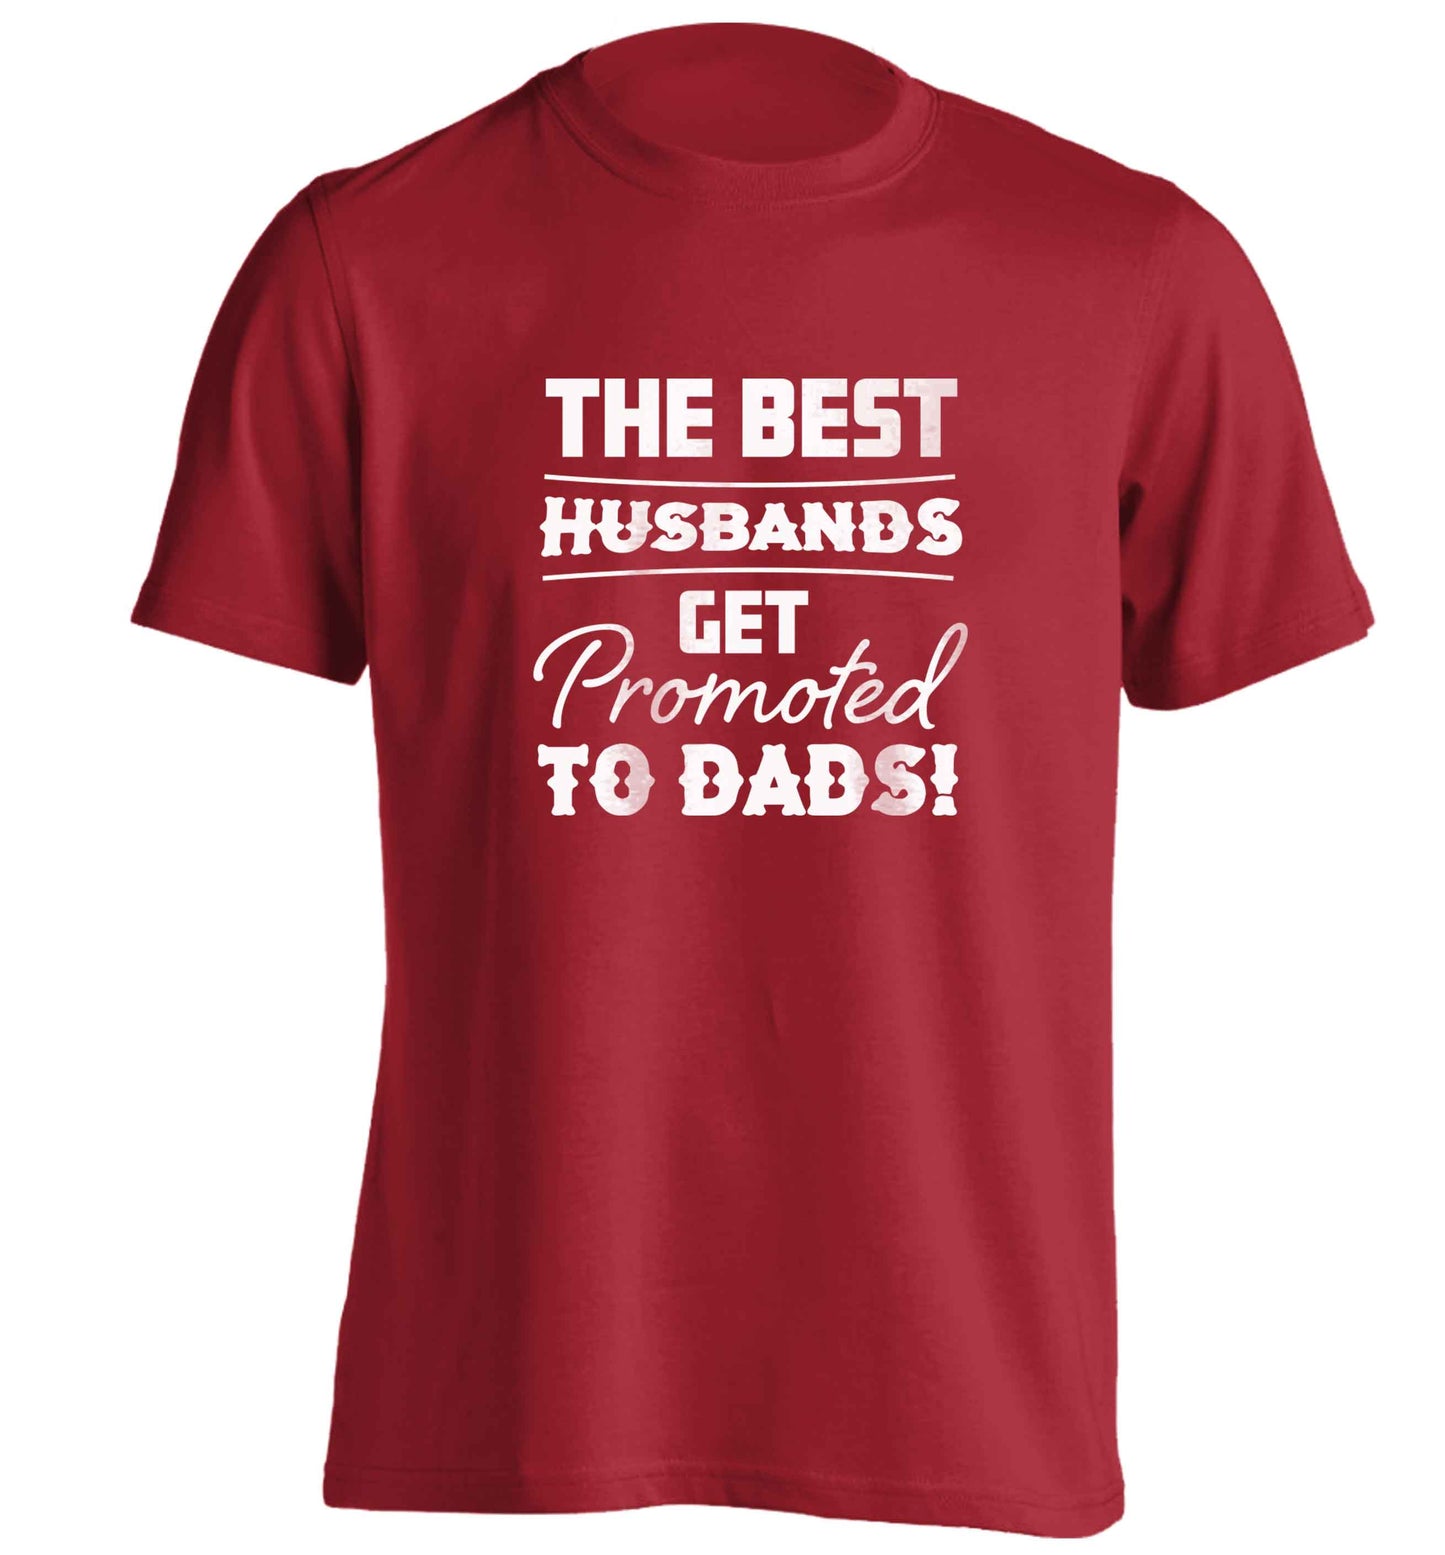 The best husbands get promoted to Dads adults unisex red Tshirt 2XL